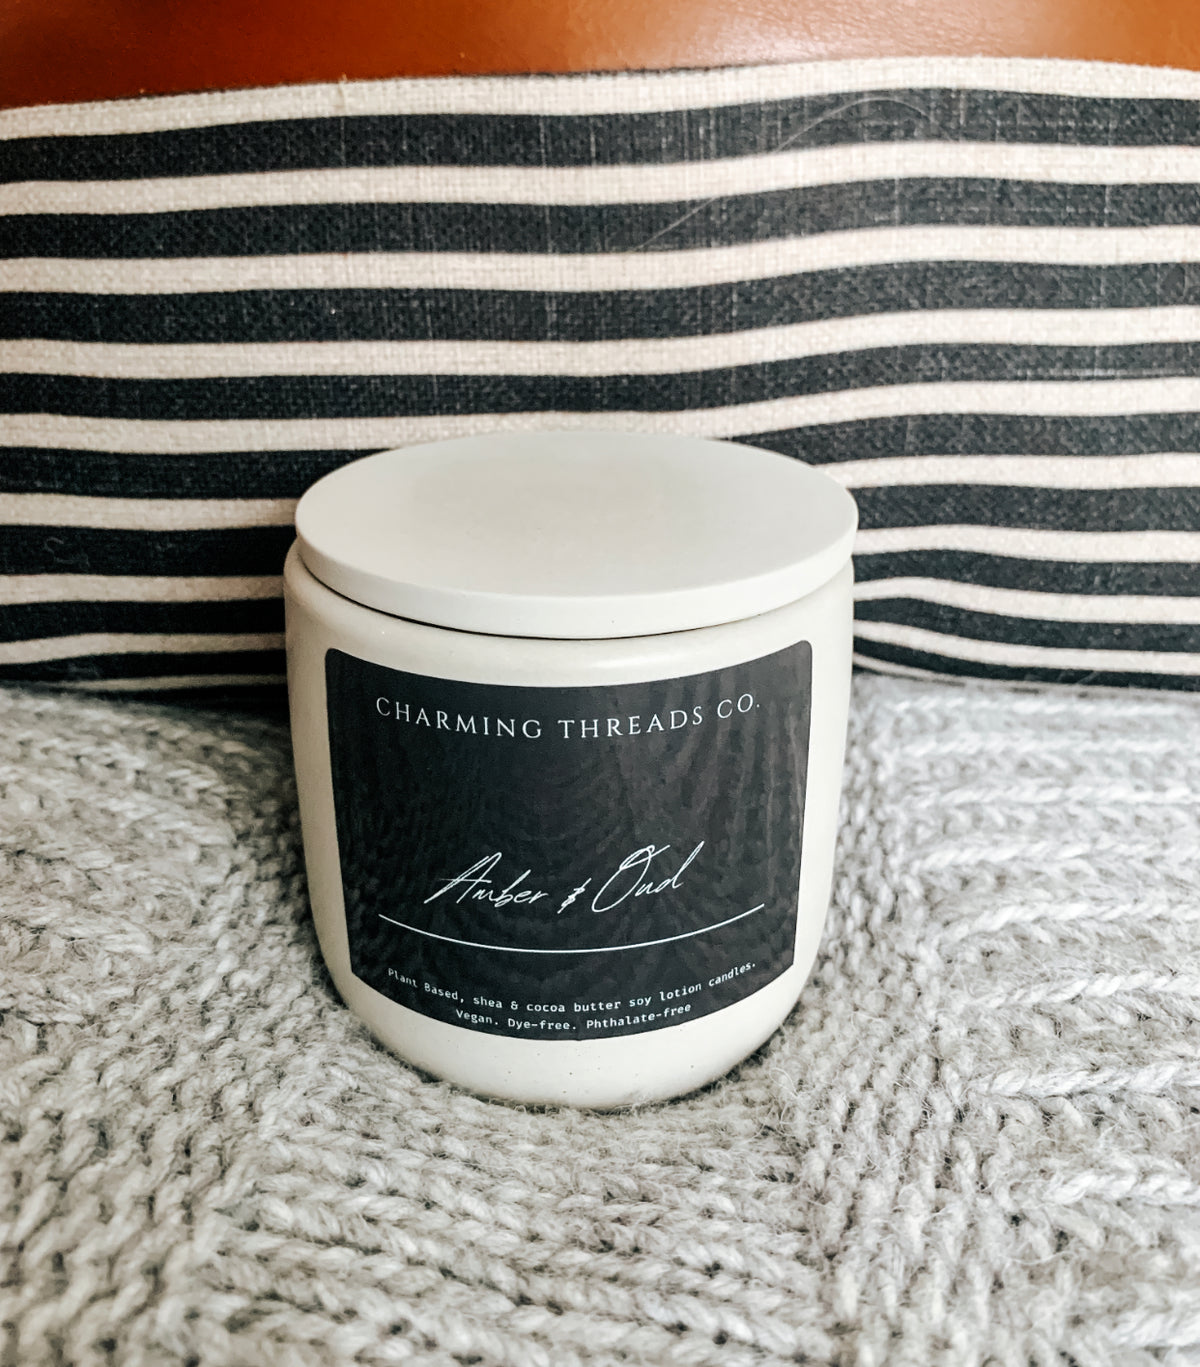 Amber & Oud Charming Threads Lotion Candle